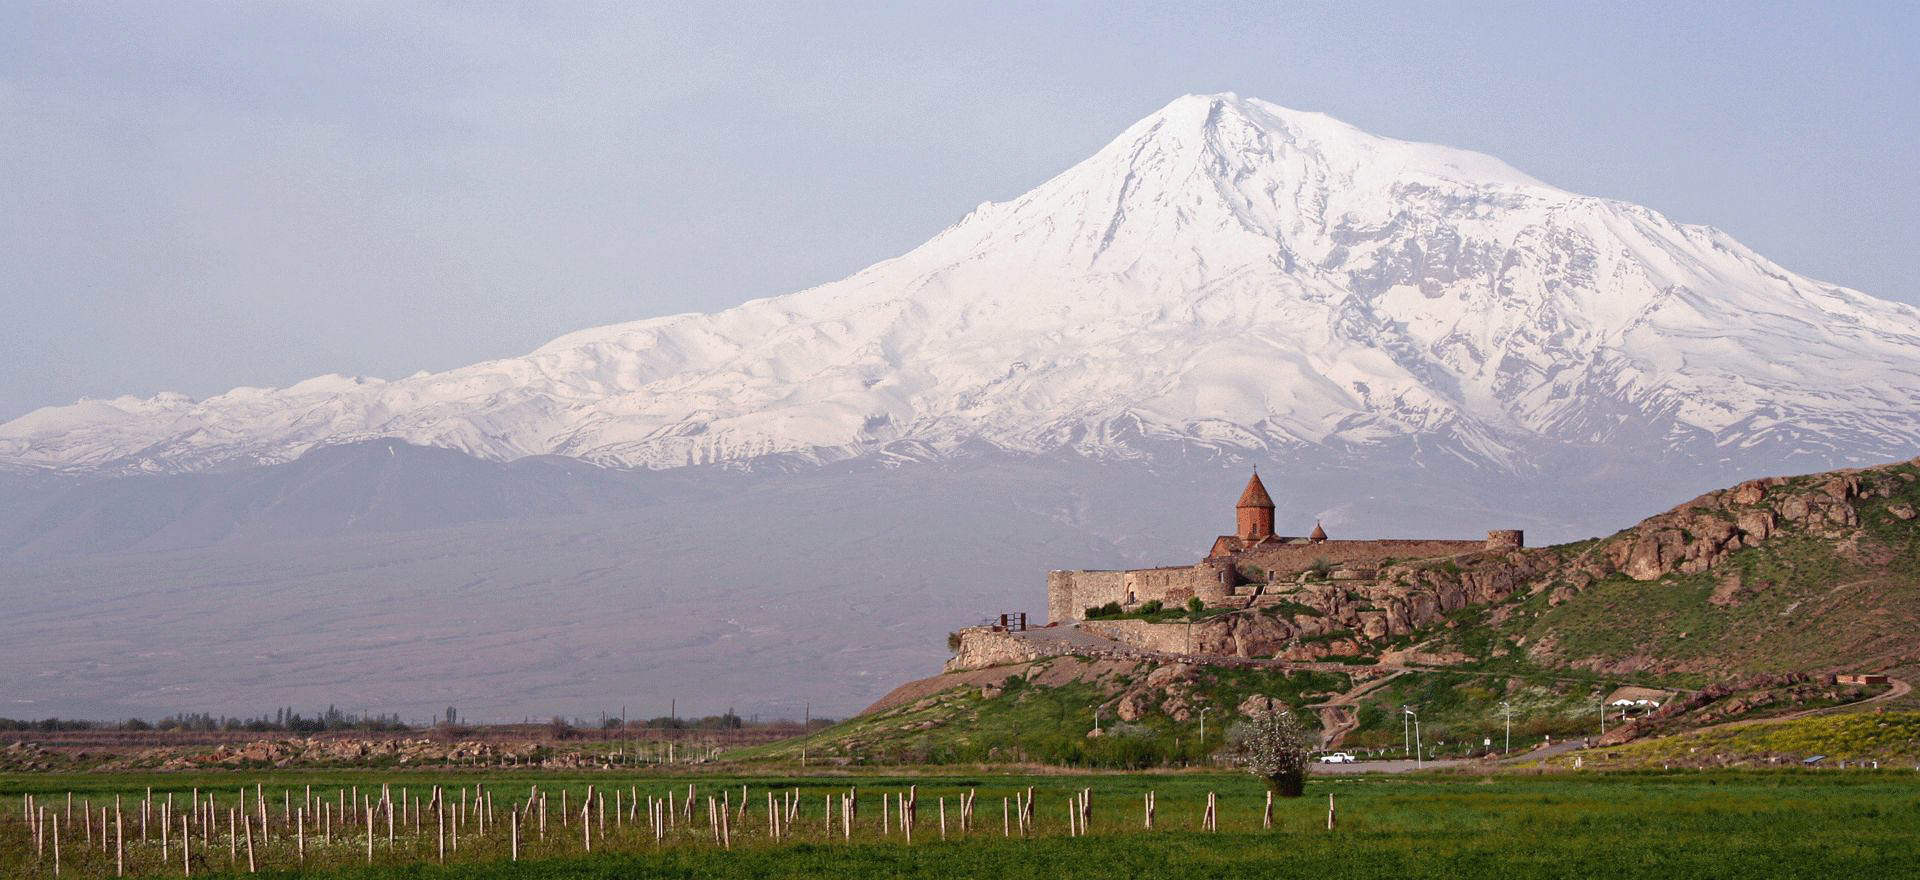 Khor Virap Monastery with Mount Ararat in the background - Armenia Holidays and Tours